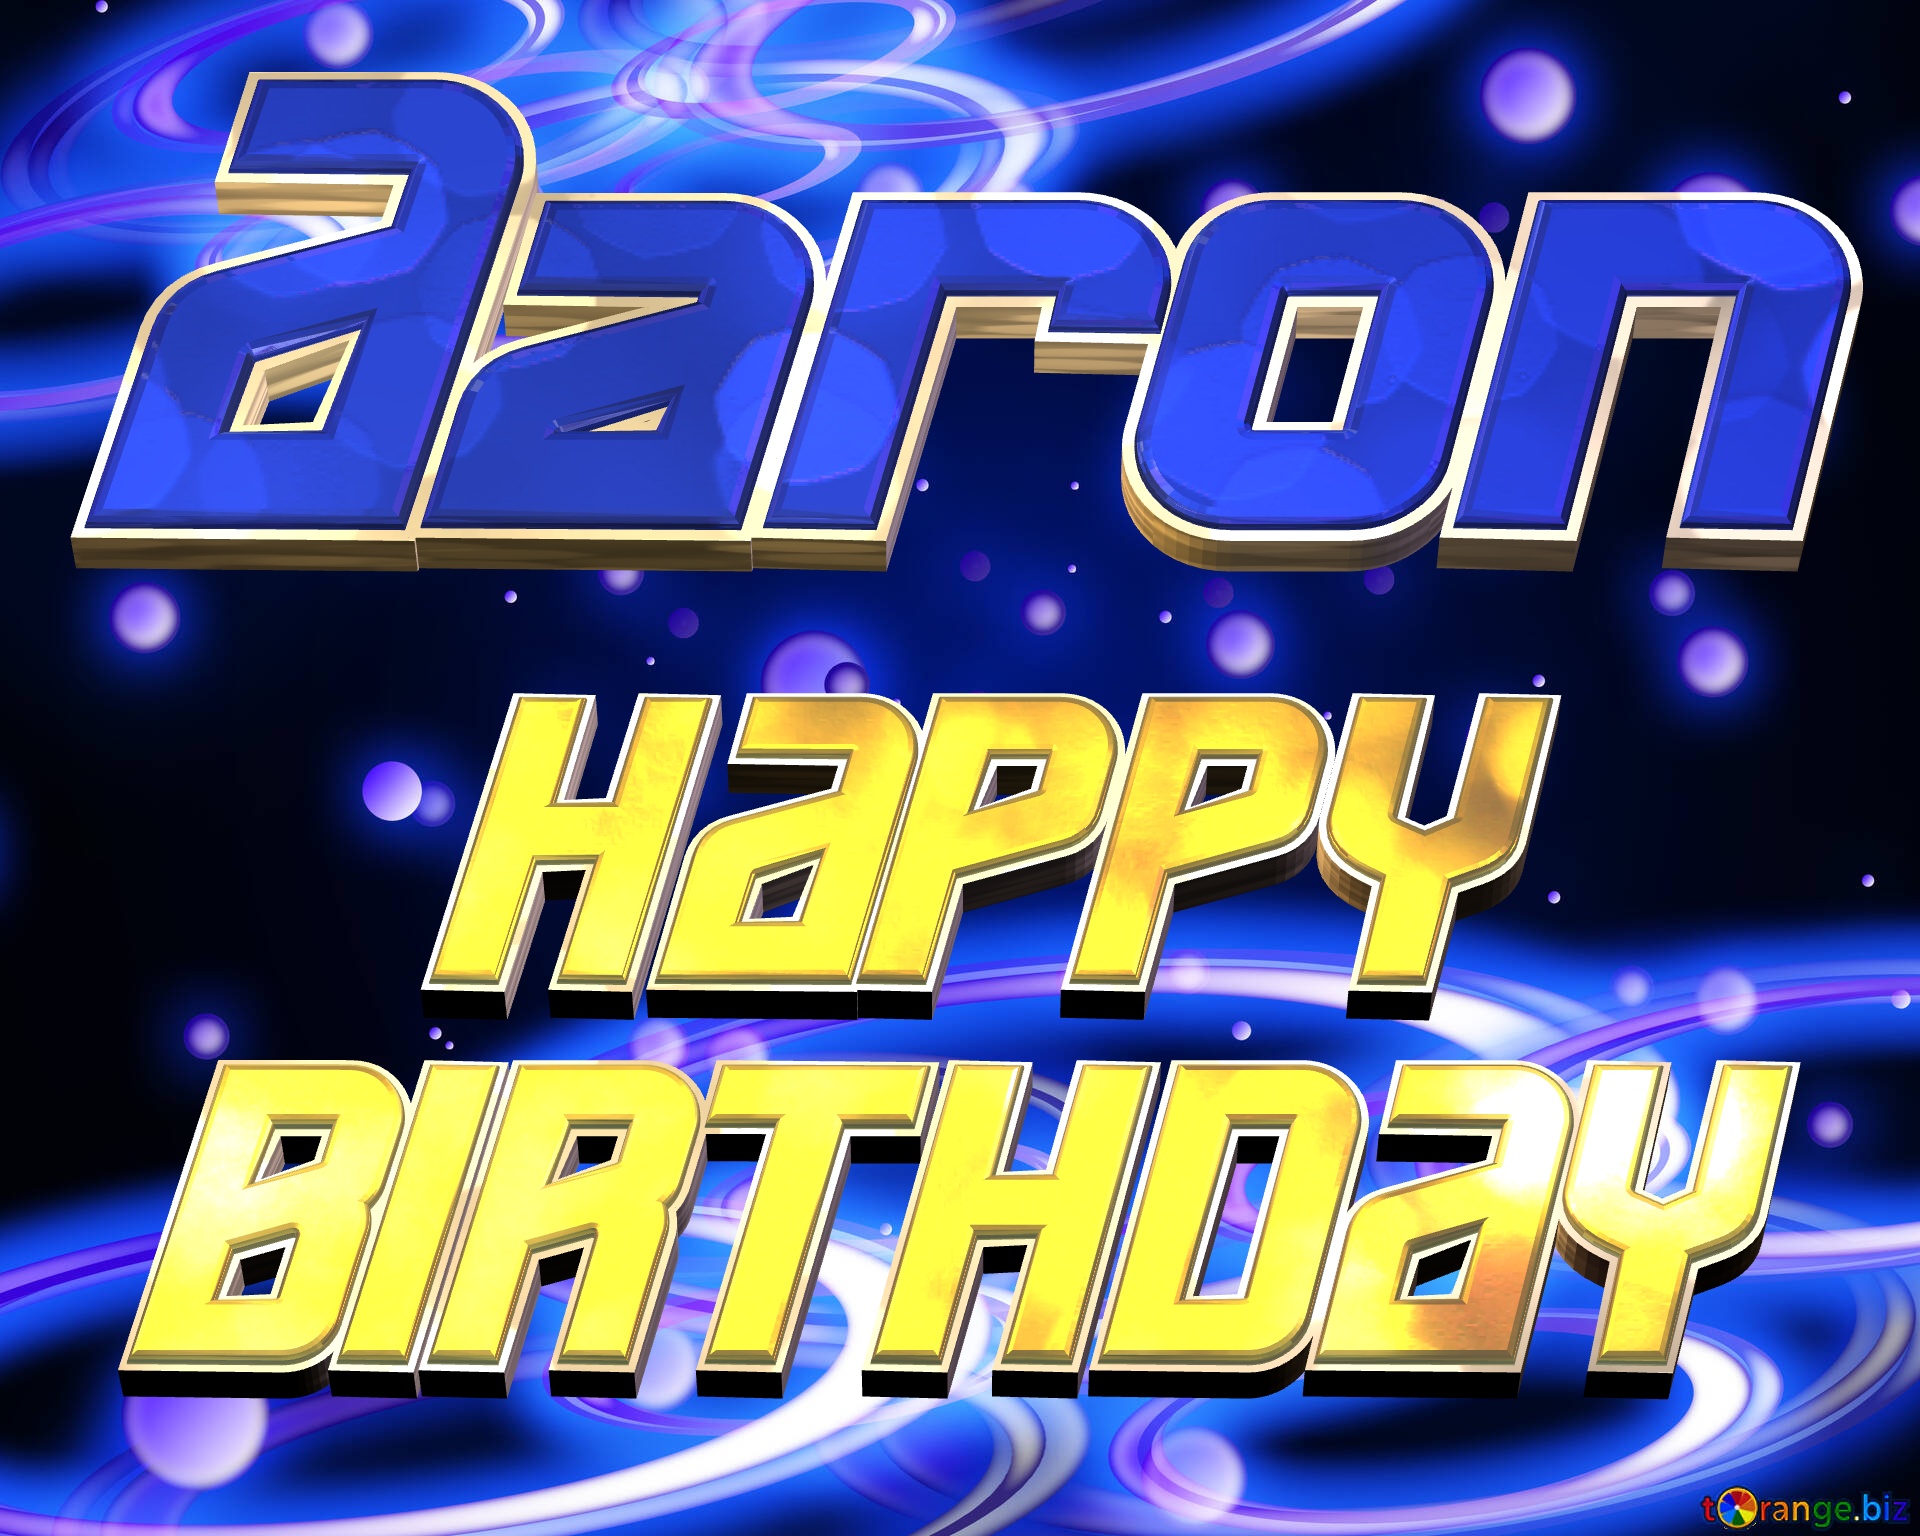 Aaron Space Happy Birthday! Technology background №54919